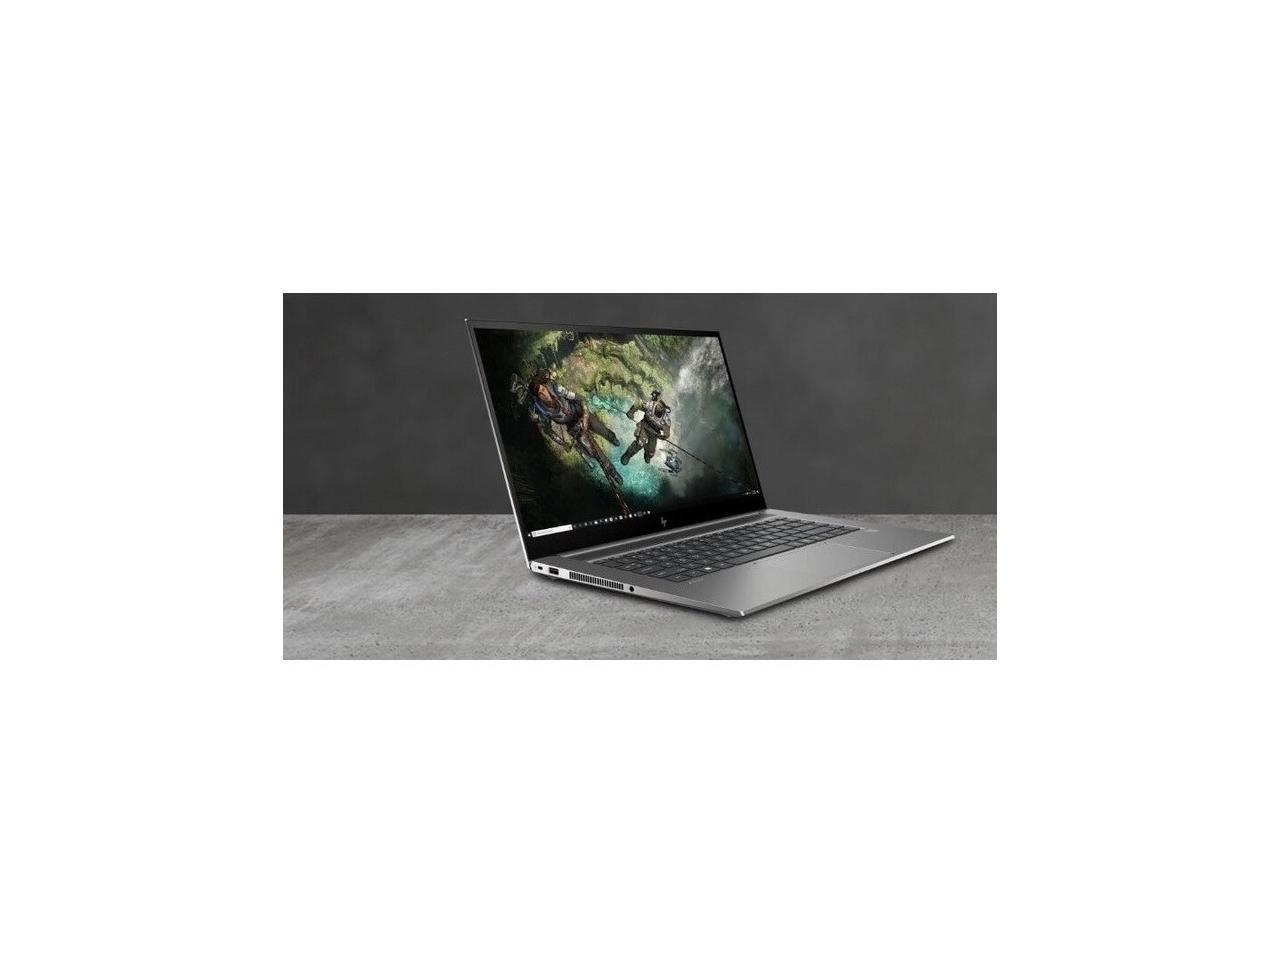 HP ZBook Create G7 15.6" Mobile Workstation - Intel Core i7 (10th Gen) i7-10750H Hexa-core (6 Core) 2.60 GHz - 32 GB RAM - 1 TB SSD - Windows 10 Pro - English (US) Keyboard - 14 Hour Battery Run